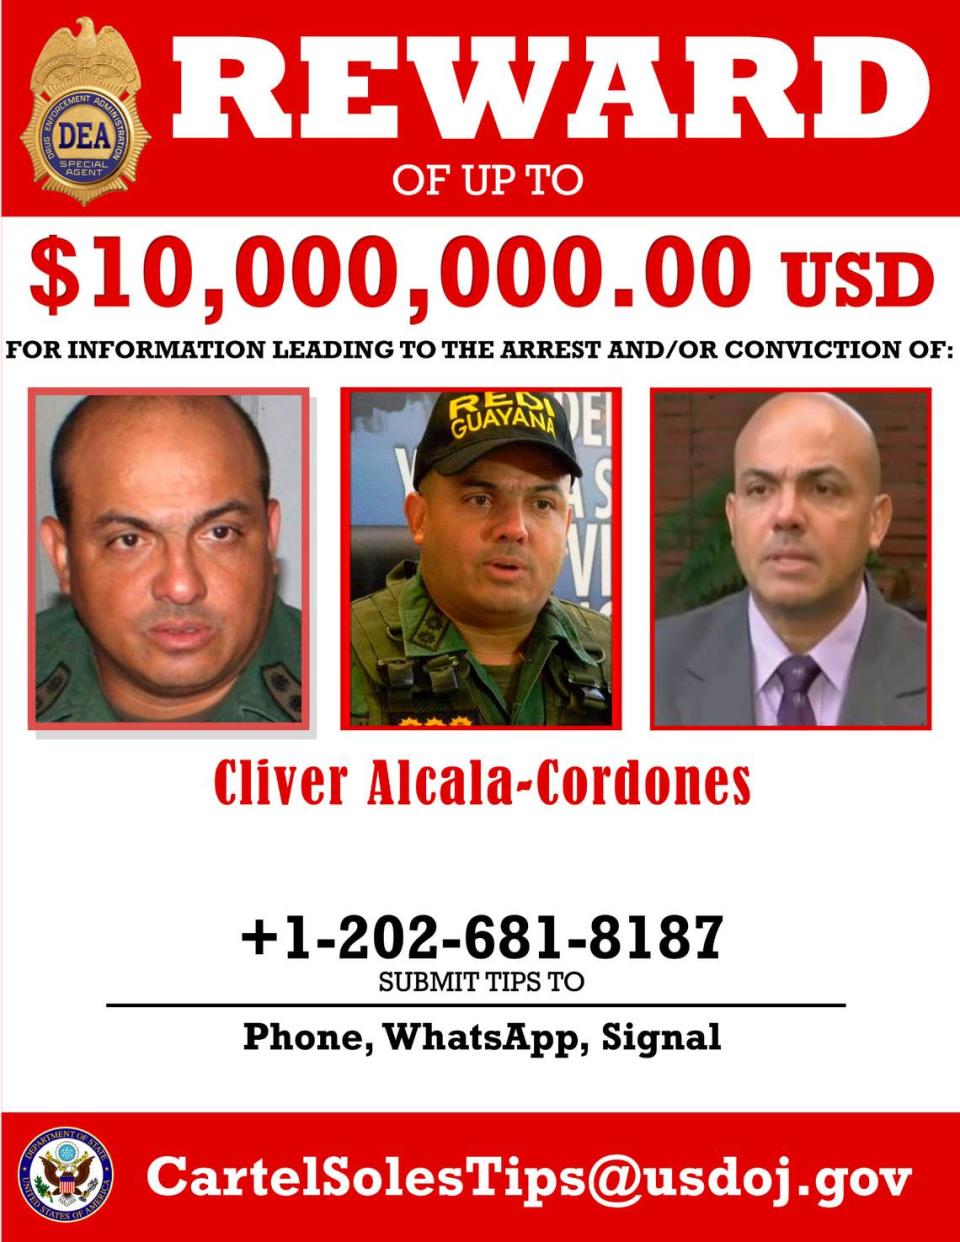 FILE - This image provided by the U.S. Department of Justice shows a reward poster for Cliver Alcala-Cordones that was released on March 26, 2020, as part of a federal indictment charging him and others in a conspiracy stretching back two decades to convert Venezuela into a launch pad for flooding the U.S. with cocaine. The retired Venezuelan army general is set to be sentenced Jan. 18, 2024 on two counts of providing support for a Colombian rebel army designated terrorist group by the U.S., charges the carry a maximum penalty of 30 years in prison. (Department of Justice via AP, File) AP